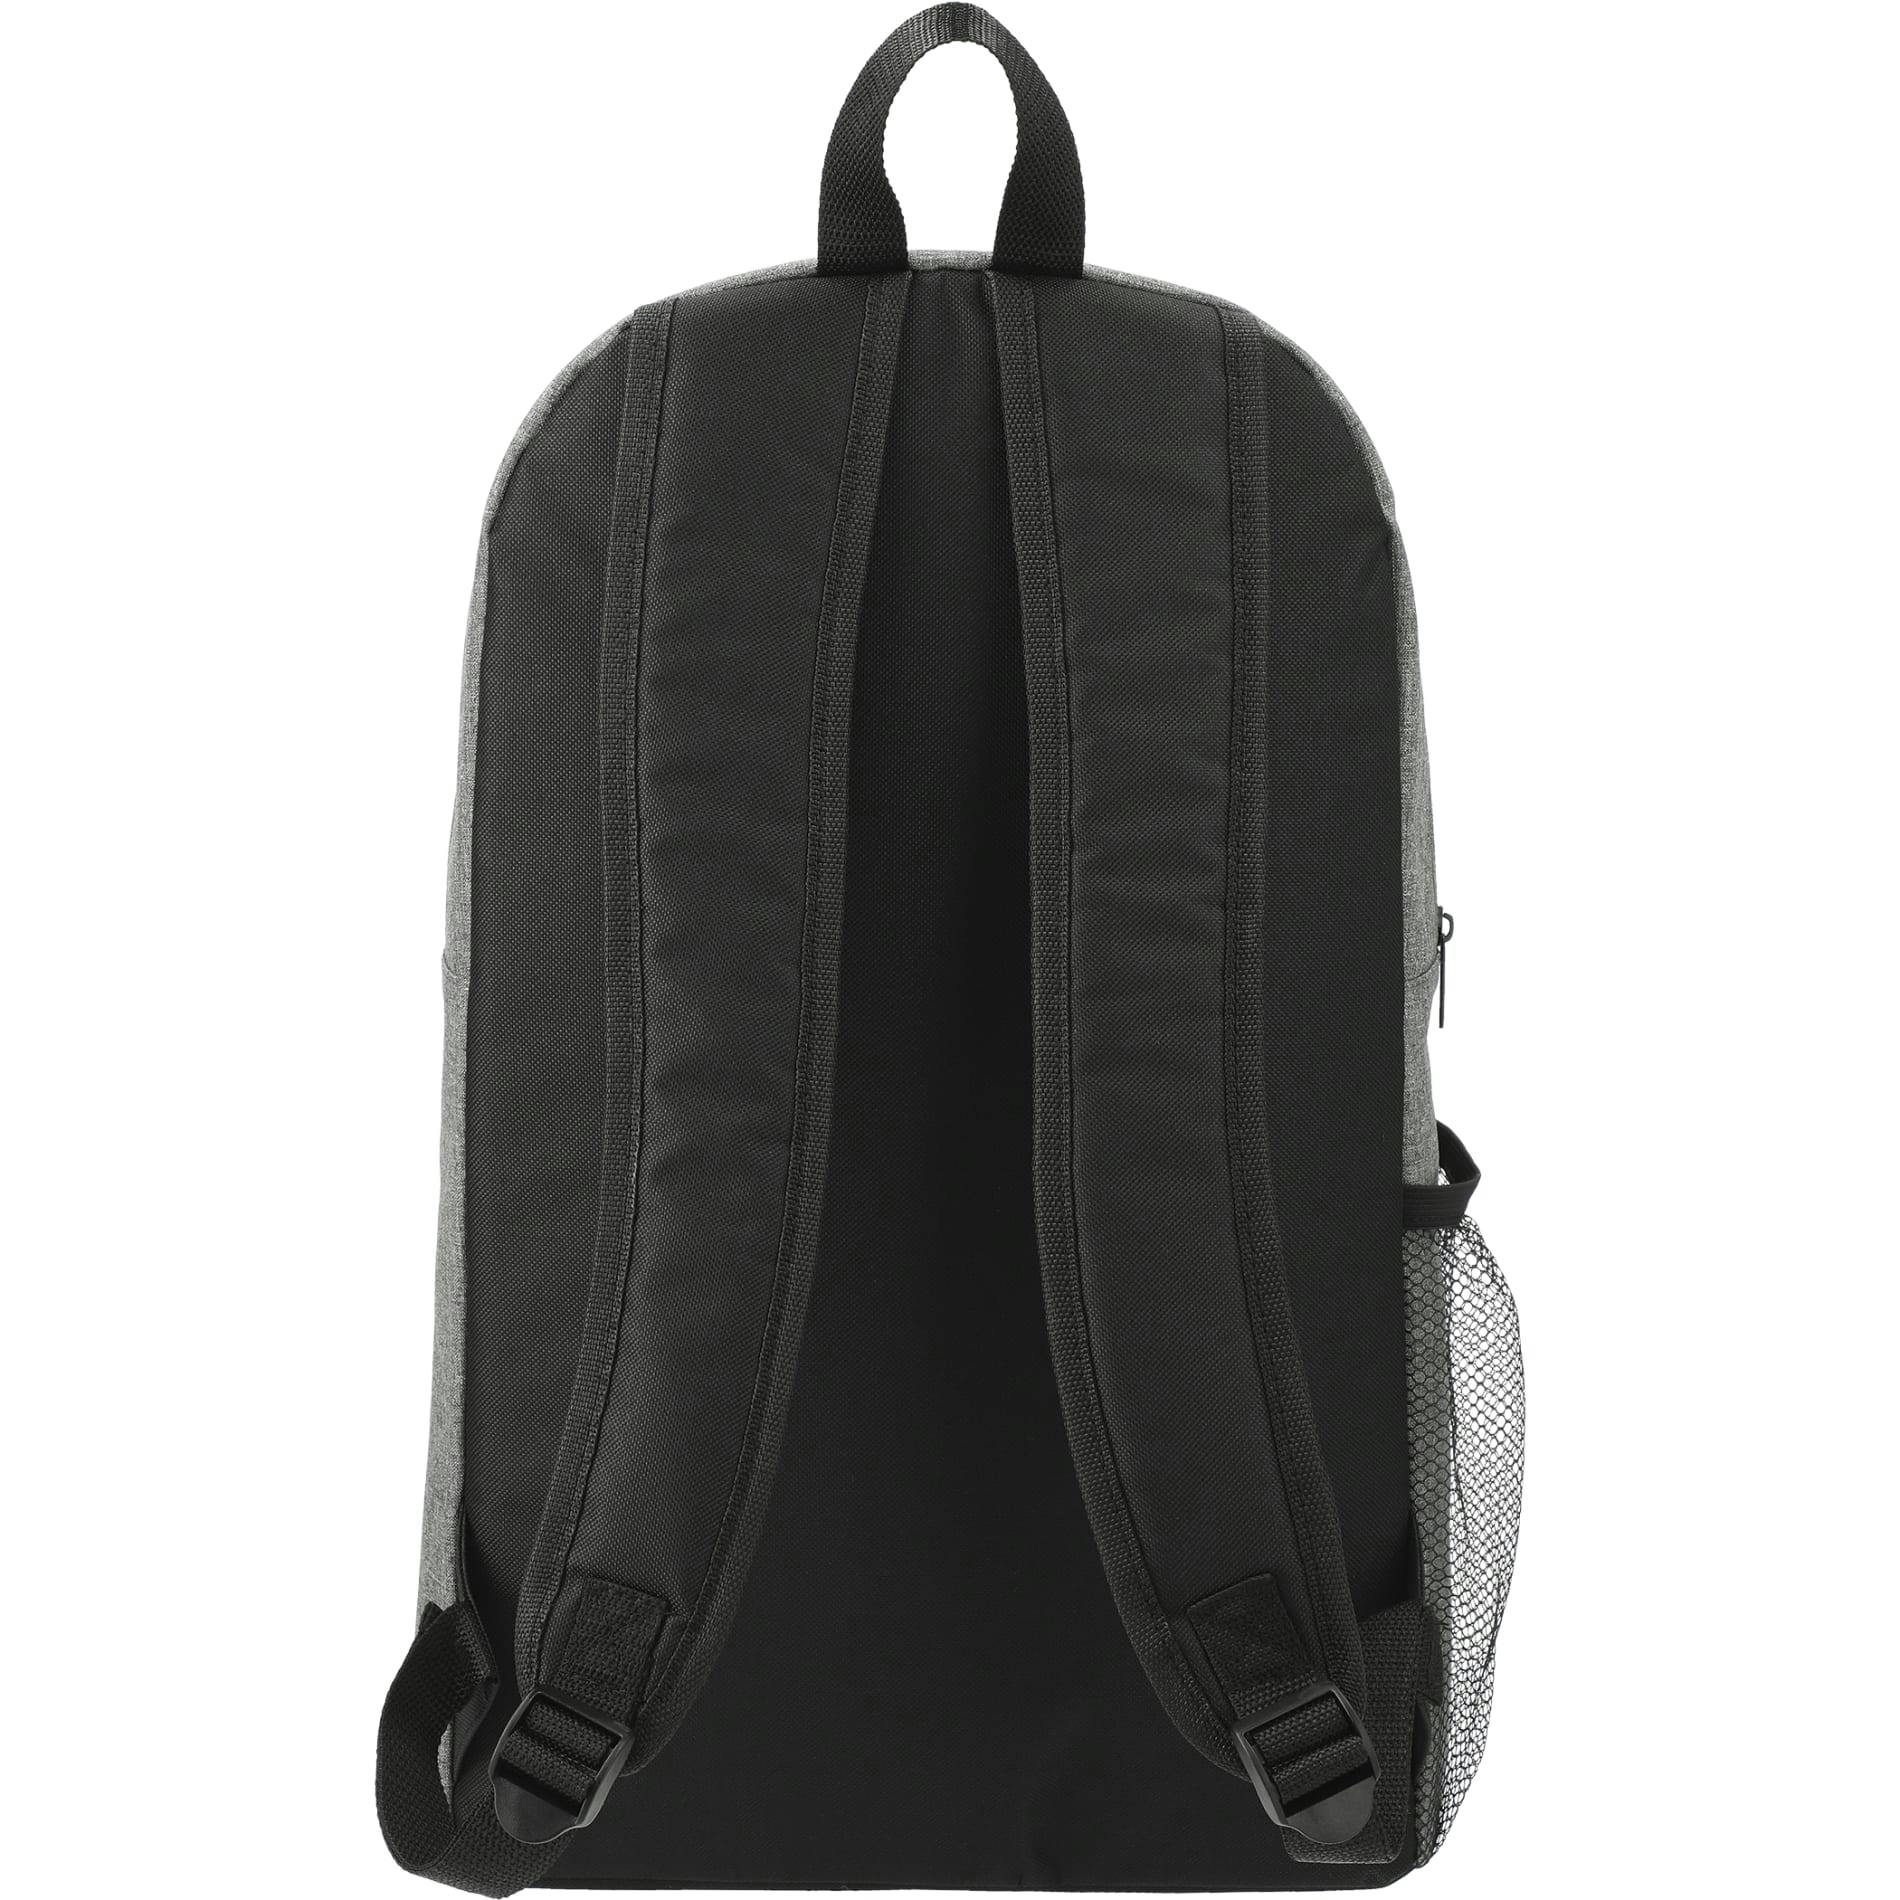 Essential Insulated 15" Computer Backpack - additional Image 5